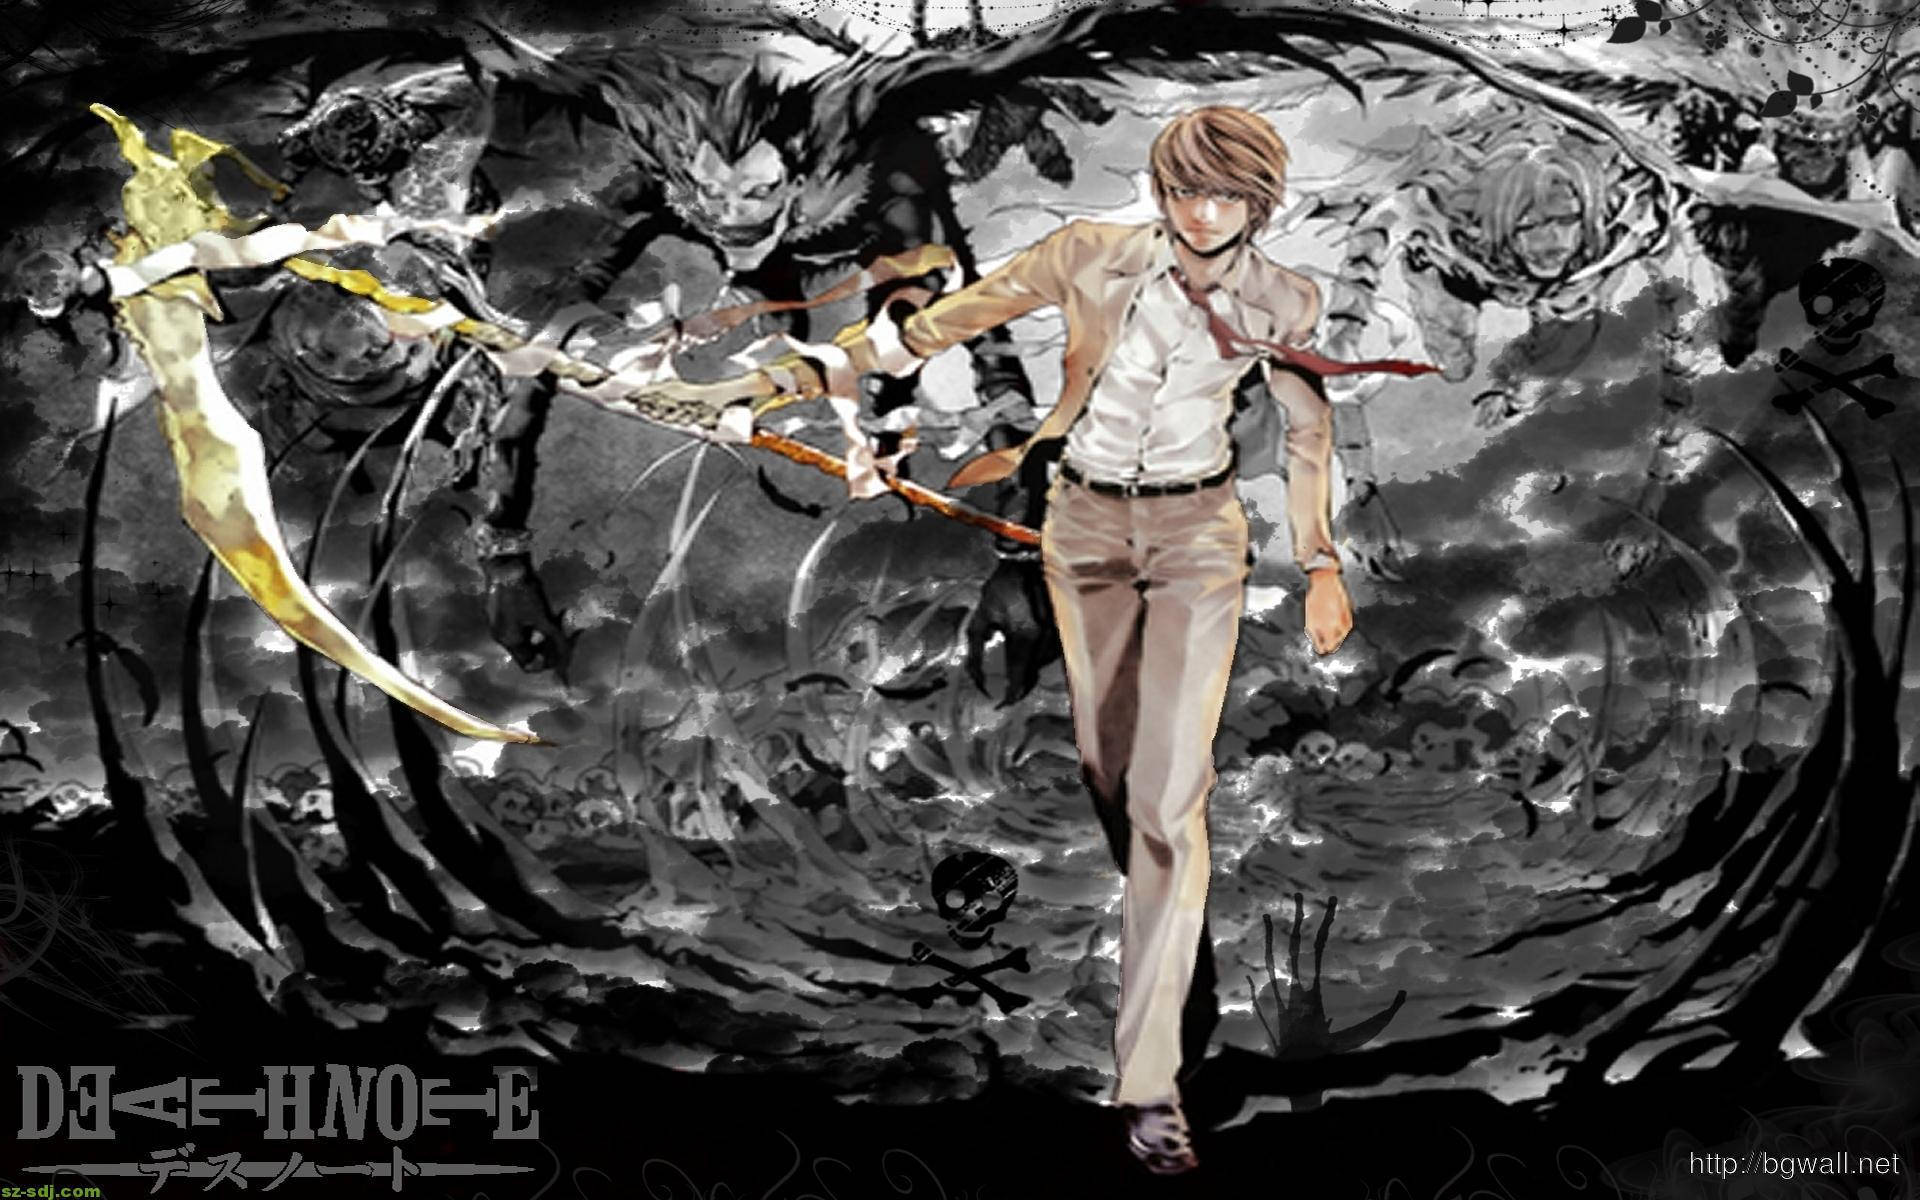 Light Yagami wields the sought-after Death Note. Wallpaper